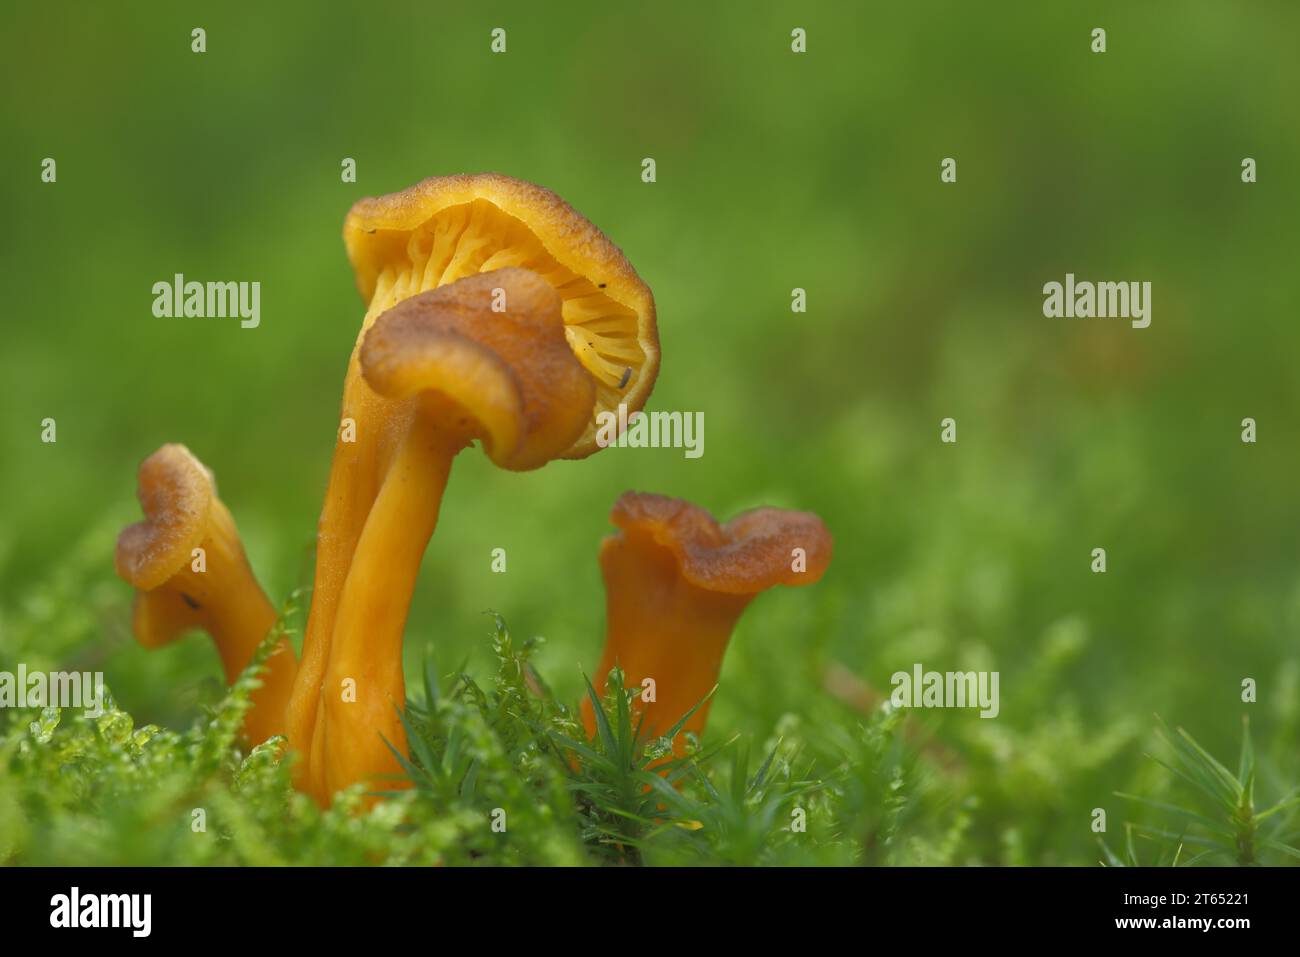 Yellow-stemmed trumpet chanterelle (Cantharellus tubaeformi) in moss, four, yellow, trumpet chanterelle, Leistling, Leistling, Leistlingsartige Stock Photo